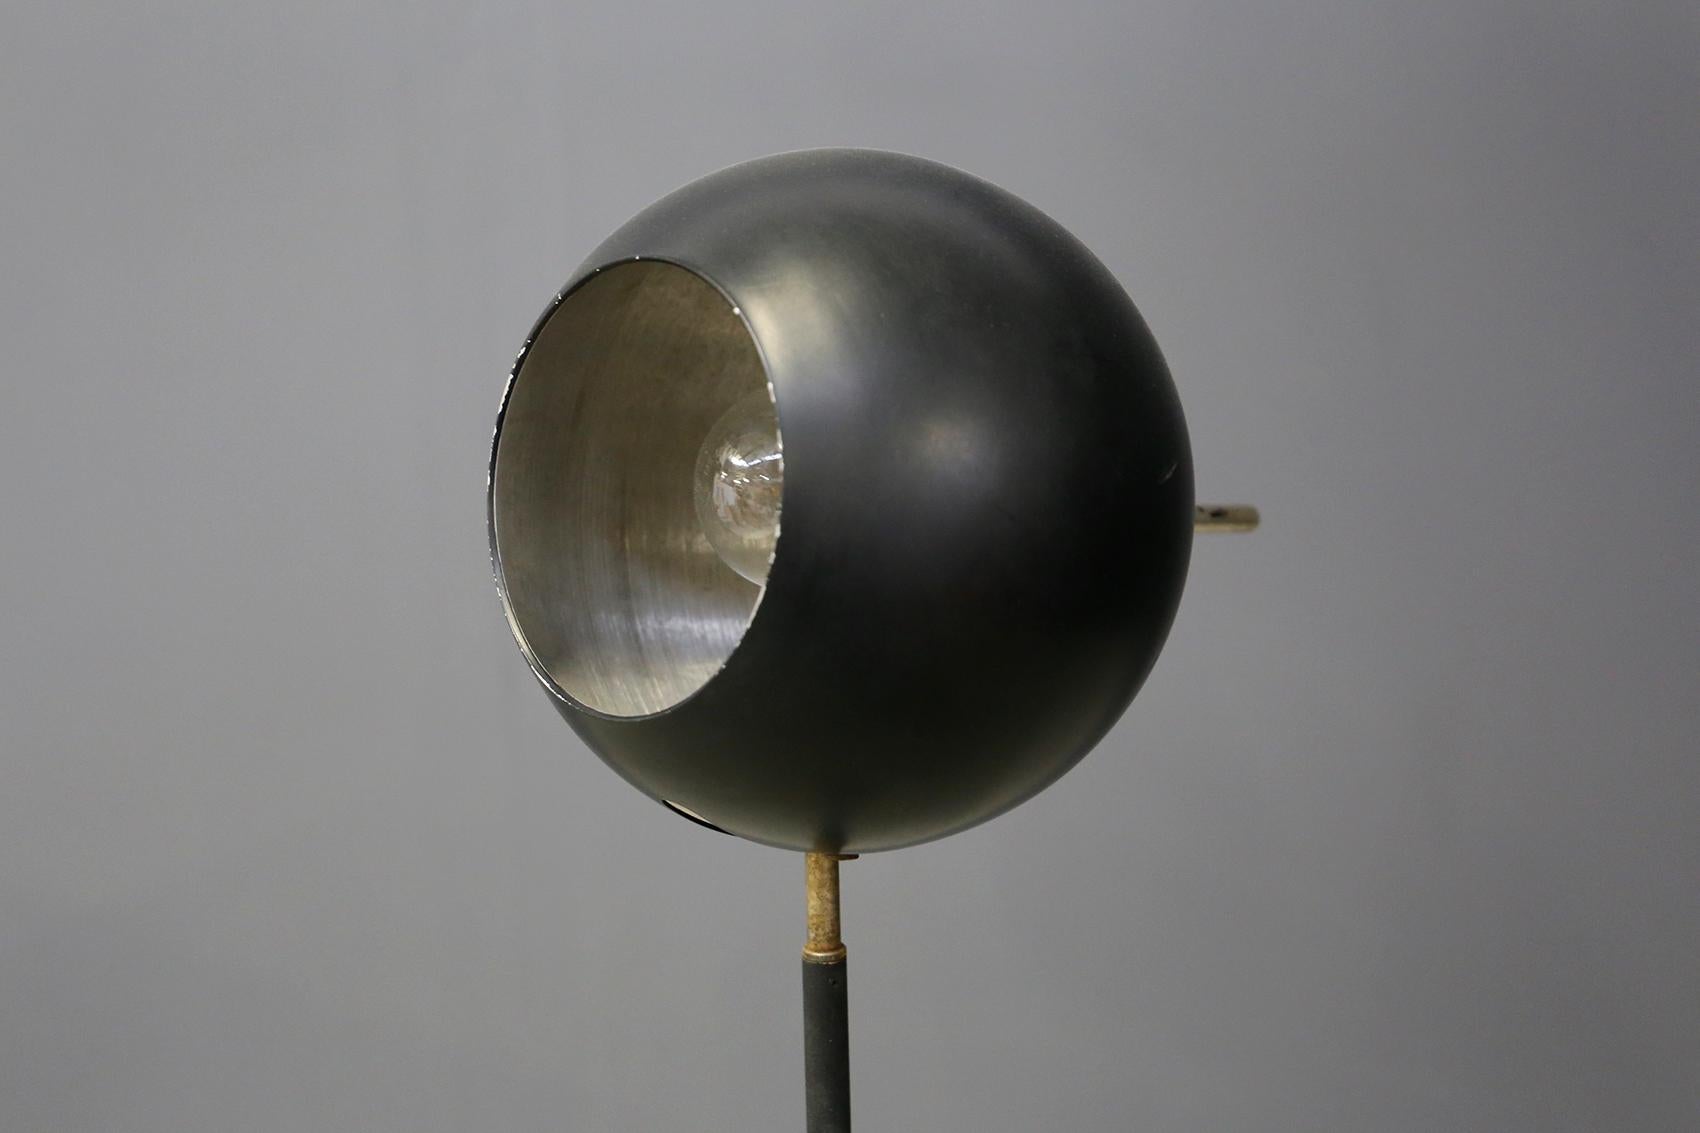 Rare floor lamp designed by Gino Sarfatti for Arteluce in 1950. The lamp is model 1082, and is made with a cast iron base. Its light CAP is in black painted aluminum. Its assembly elements are in brass. The floor lamp is in excellent condition has